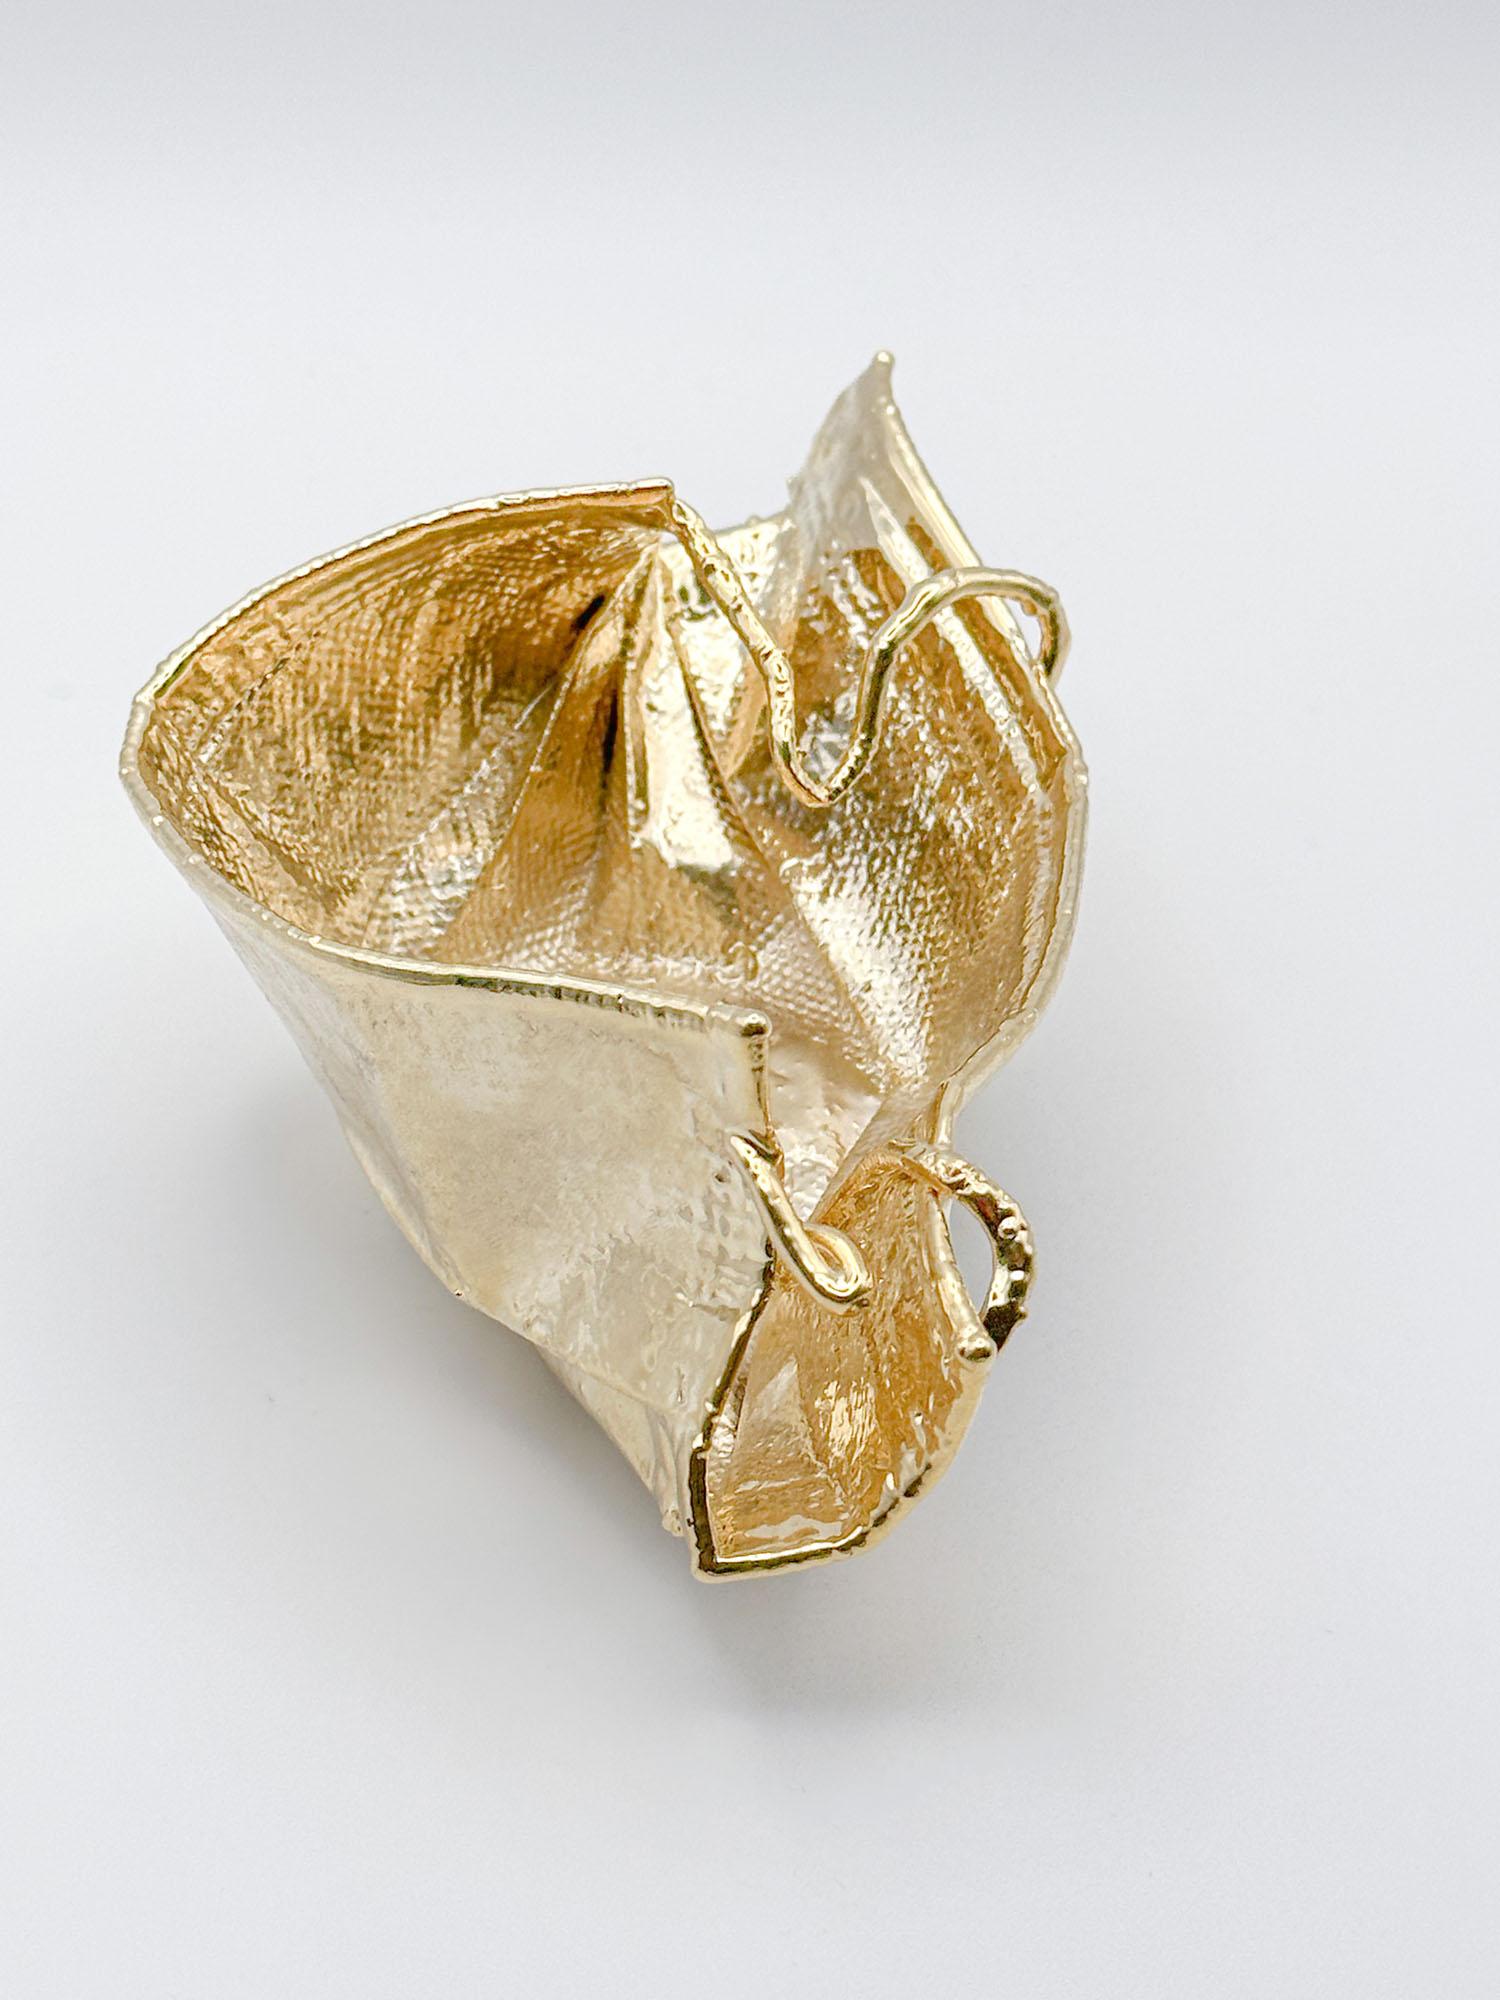 Postmoderne Remask Act 001 Gold Art Objects for Objects for Surgical Mask by Enrico Girotti en vente